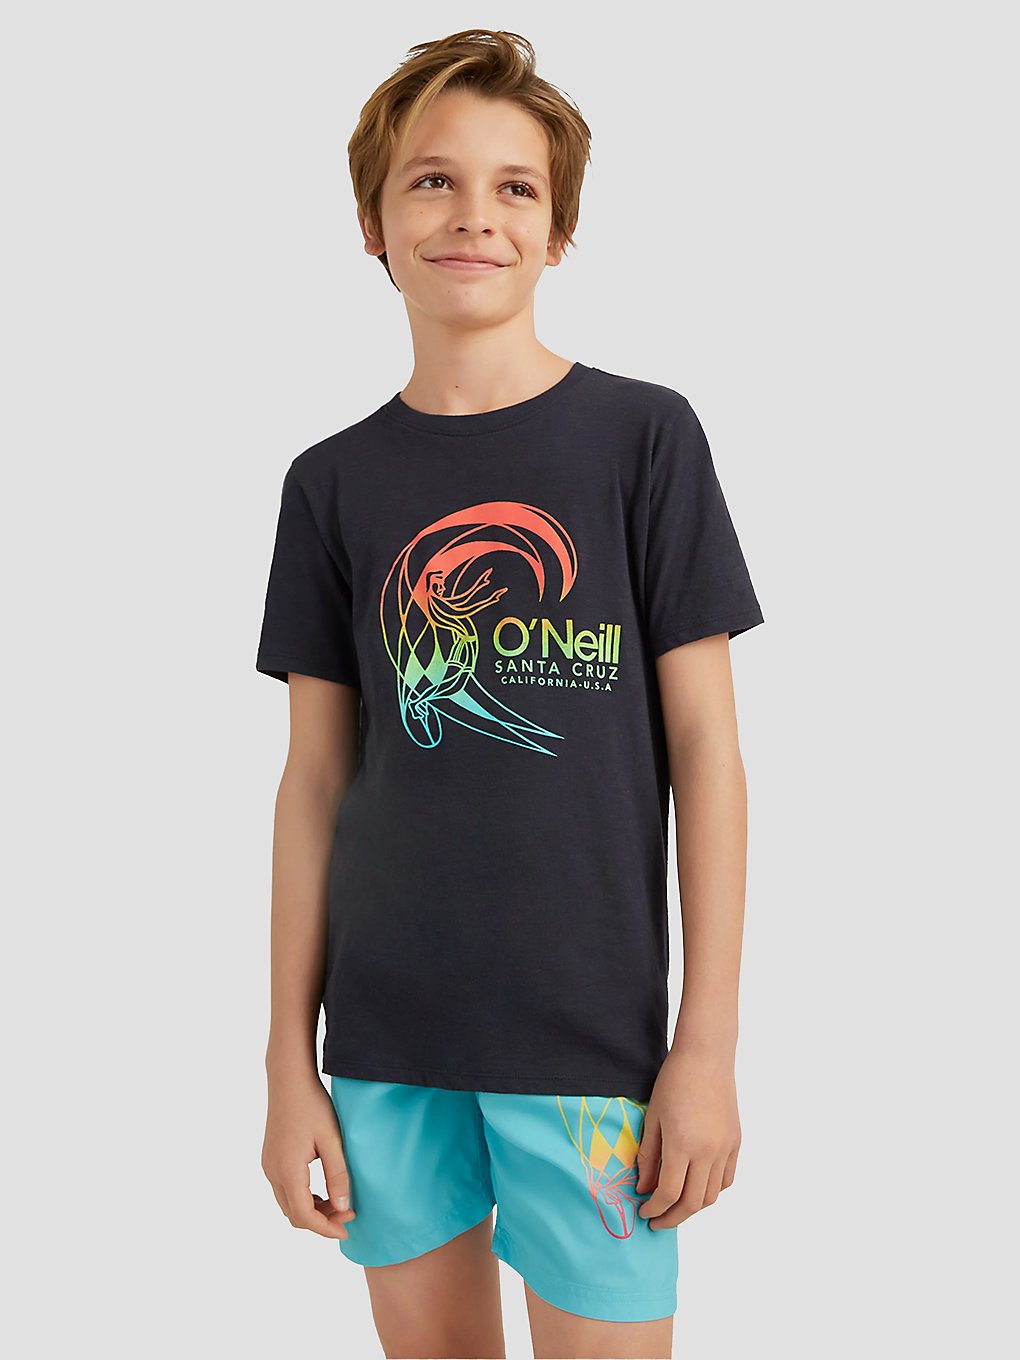 O'Neill Circle Surfer T-Shirt outer space kaufen